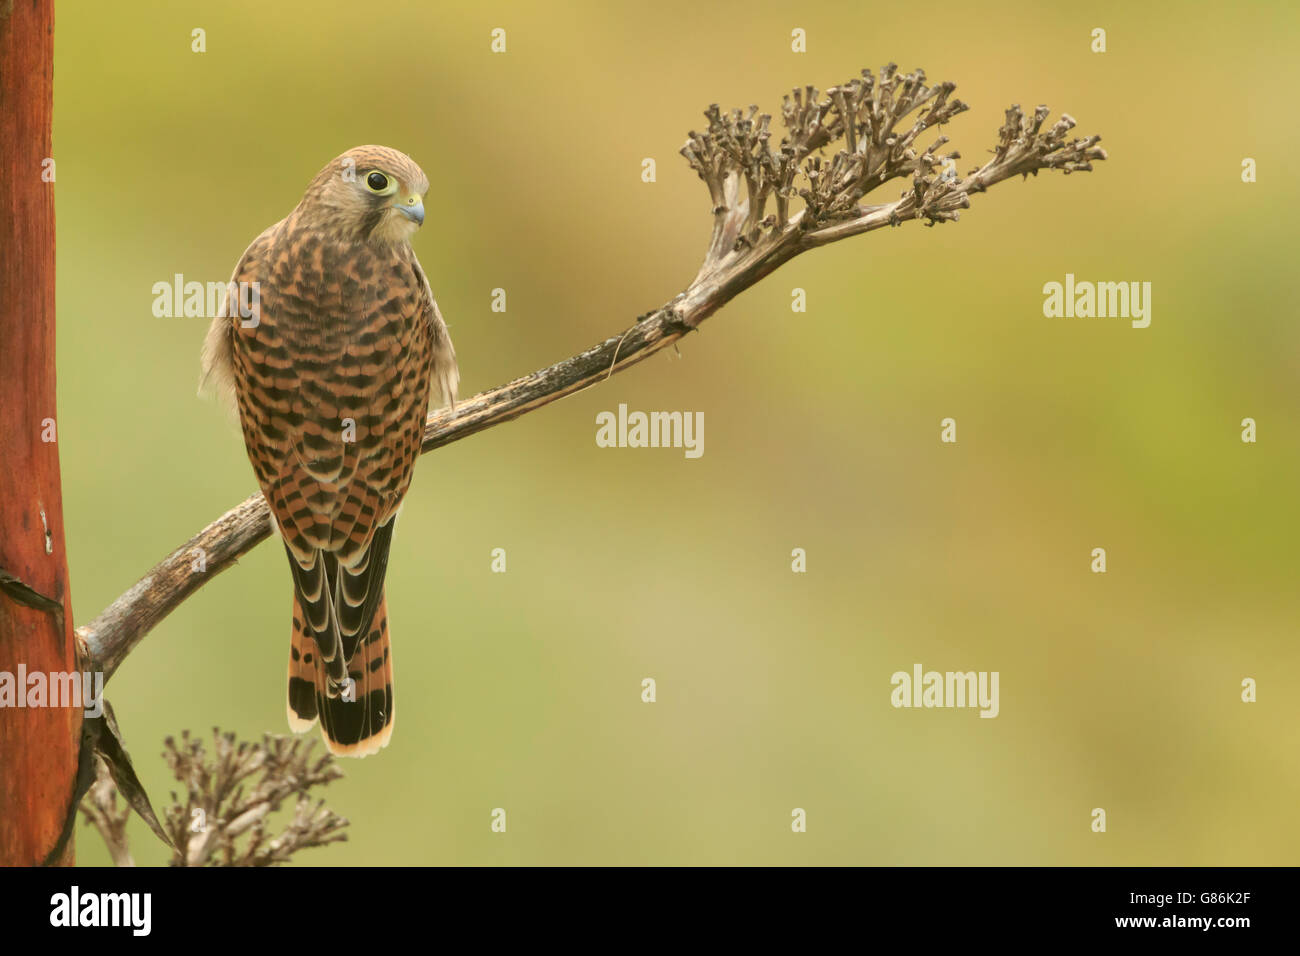 The common kestrel (Falco tinnunculus). Juvenile bird of prey on a cactus flower tree with clean green background eye level Stock Photo